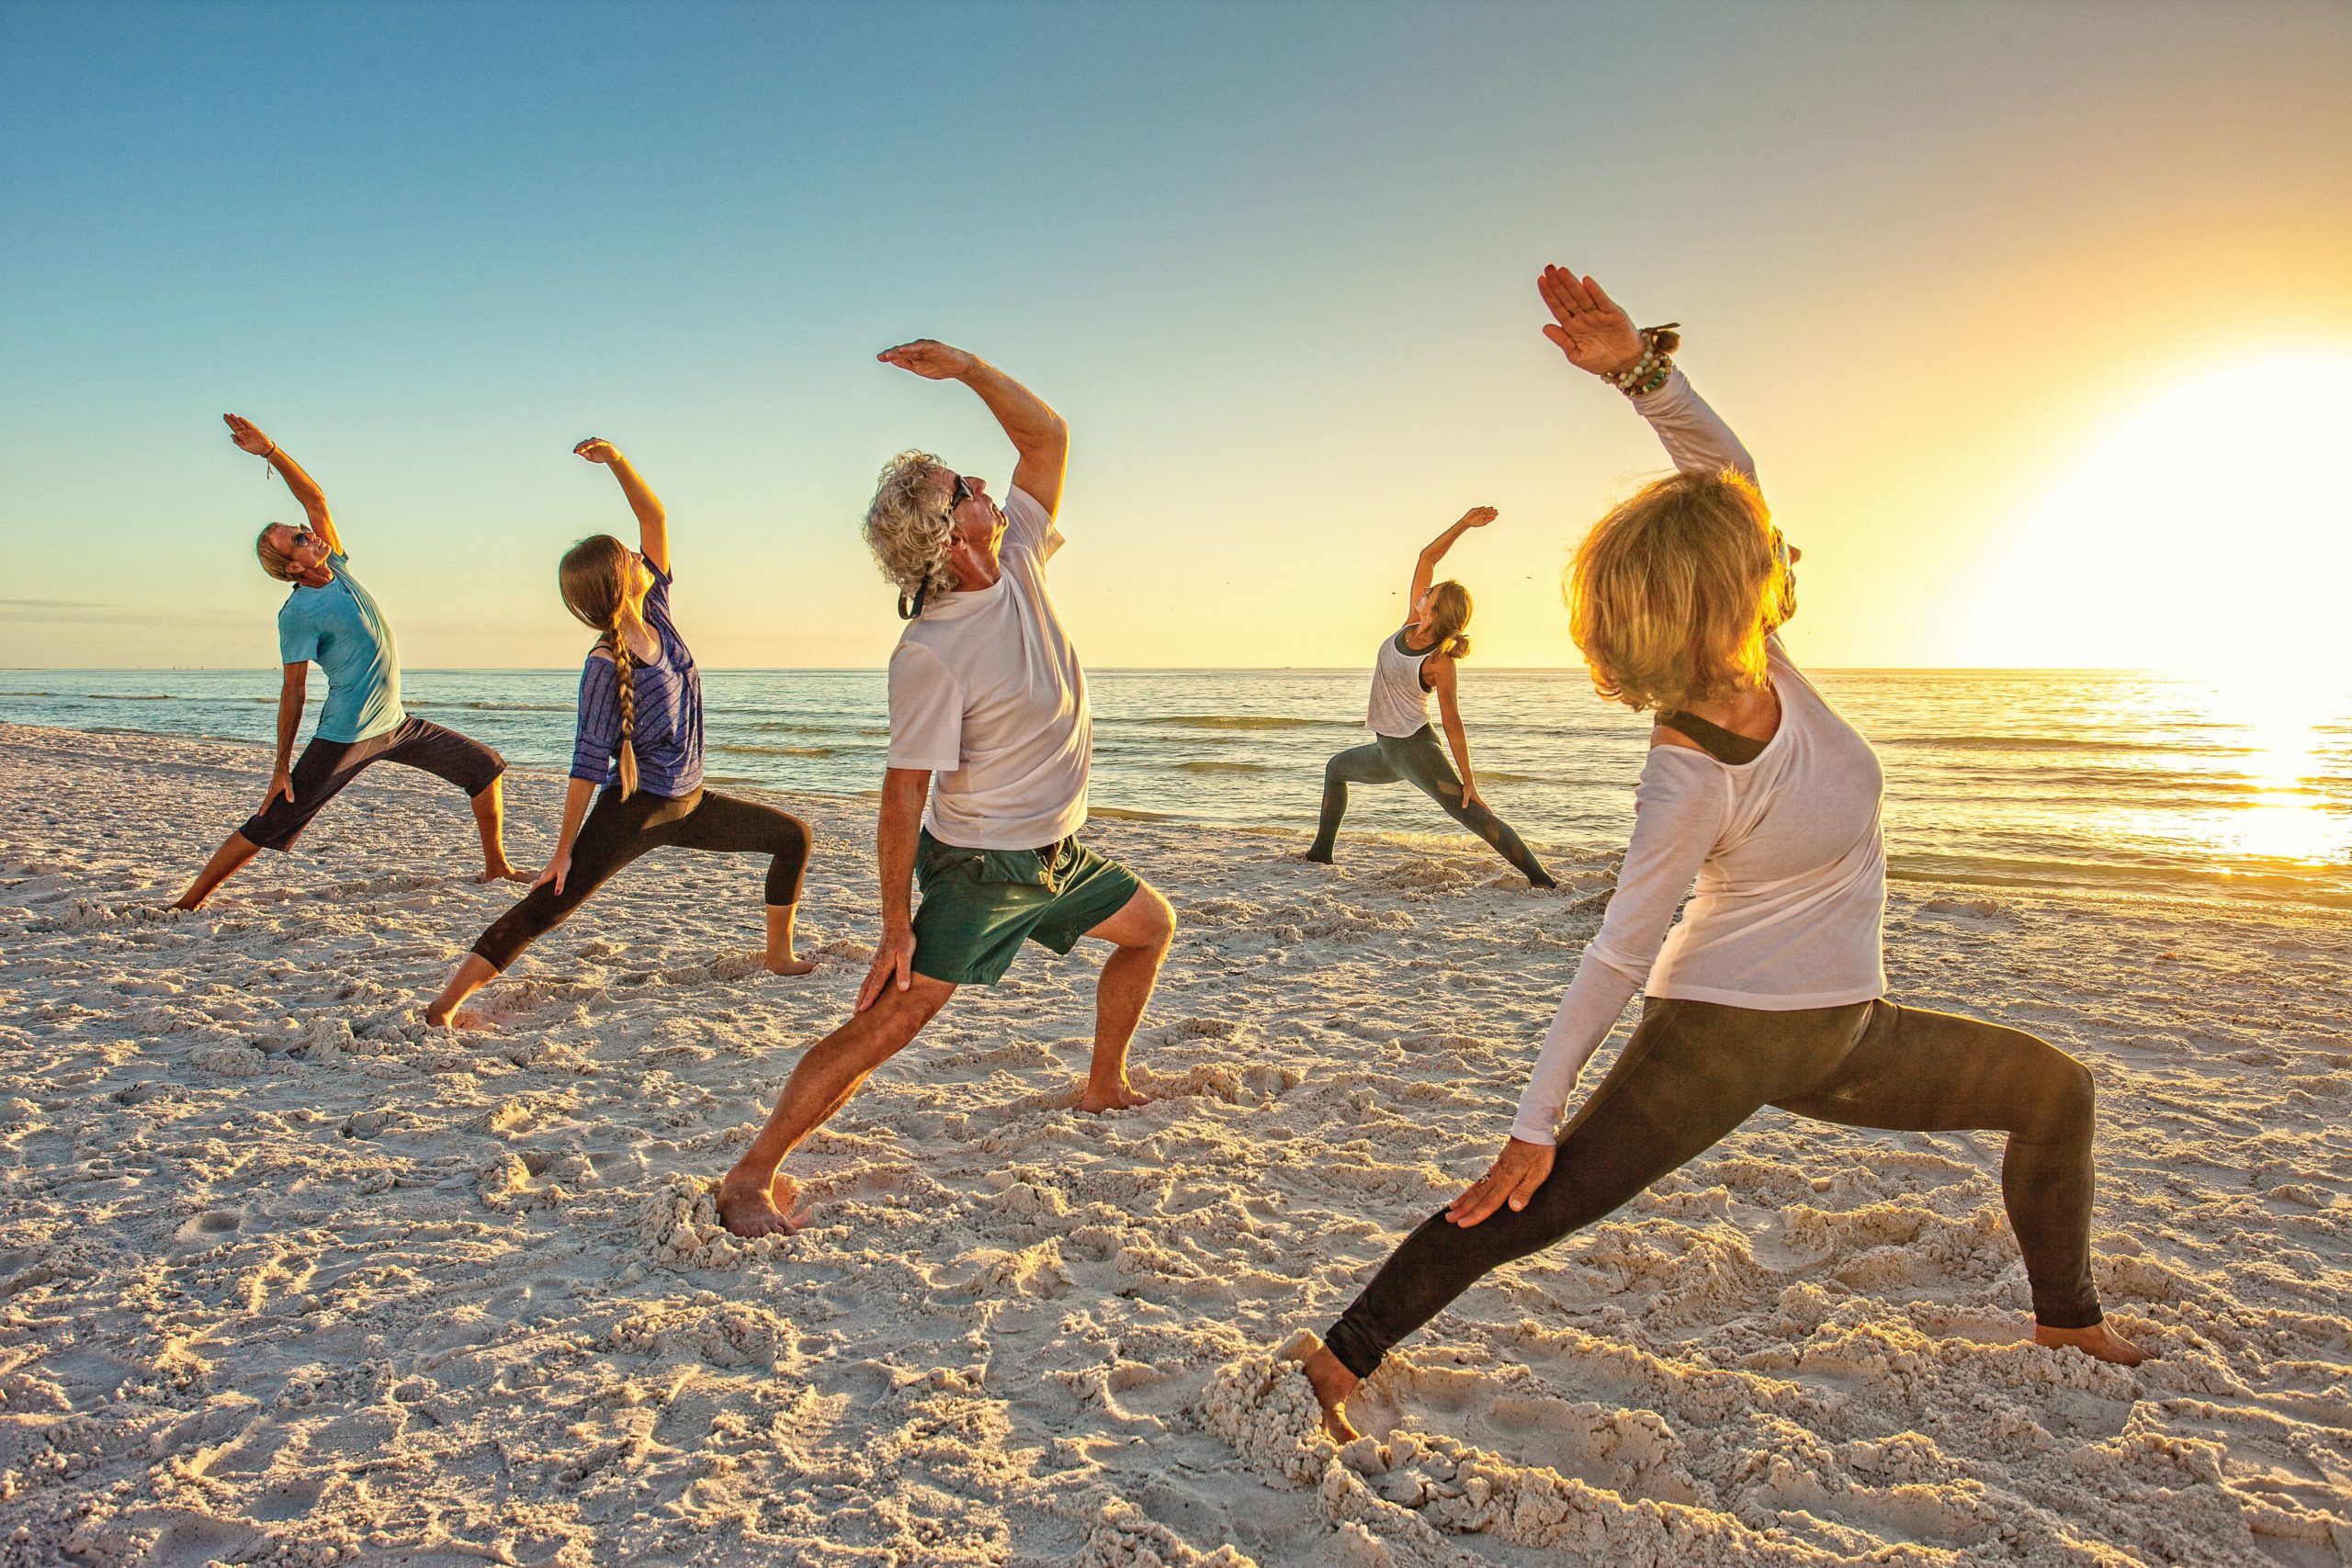 Stretched out on the sand: Find your bliss with beach yoga